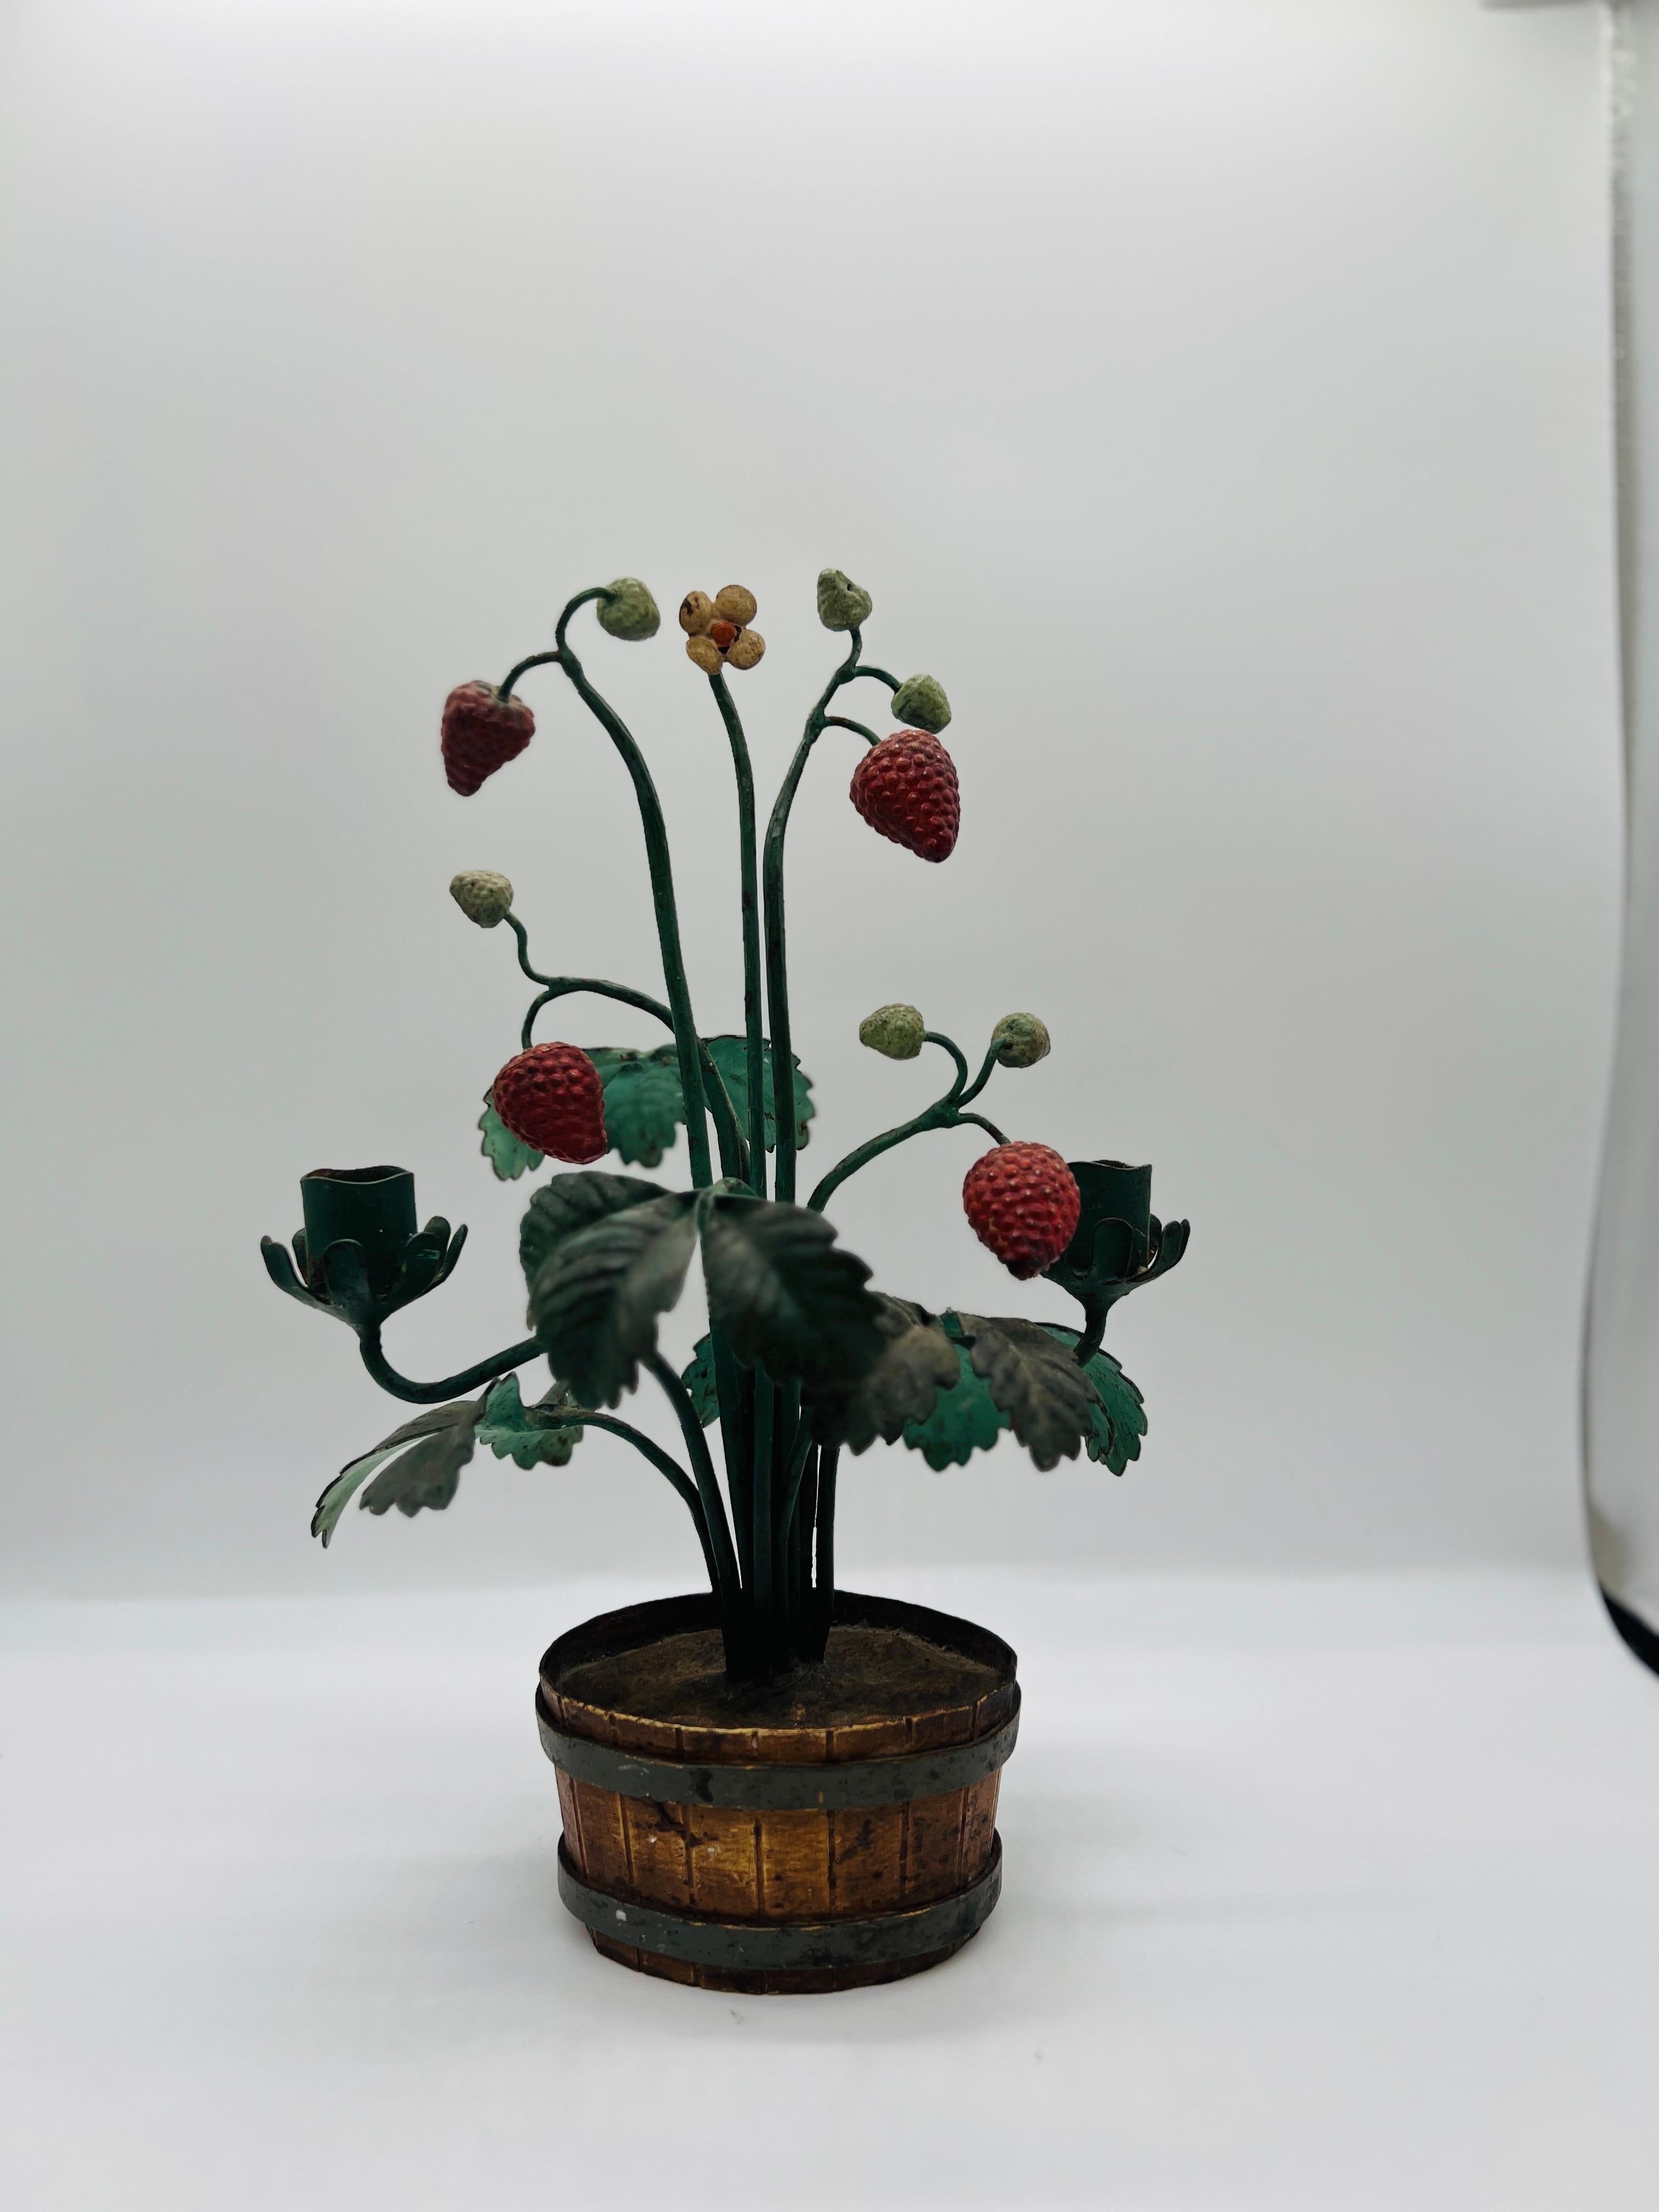 Italian, mid 20th century.

A vintage Italian hand painted tole topiary depicting a strawberry bush blooming inside a iron banded basket. Two wrought iron candlestick arms mounted. Apparently unmarked. 
Heavy and good quality. 